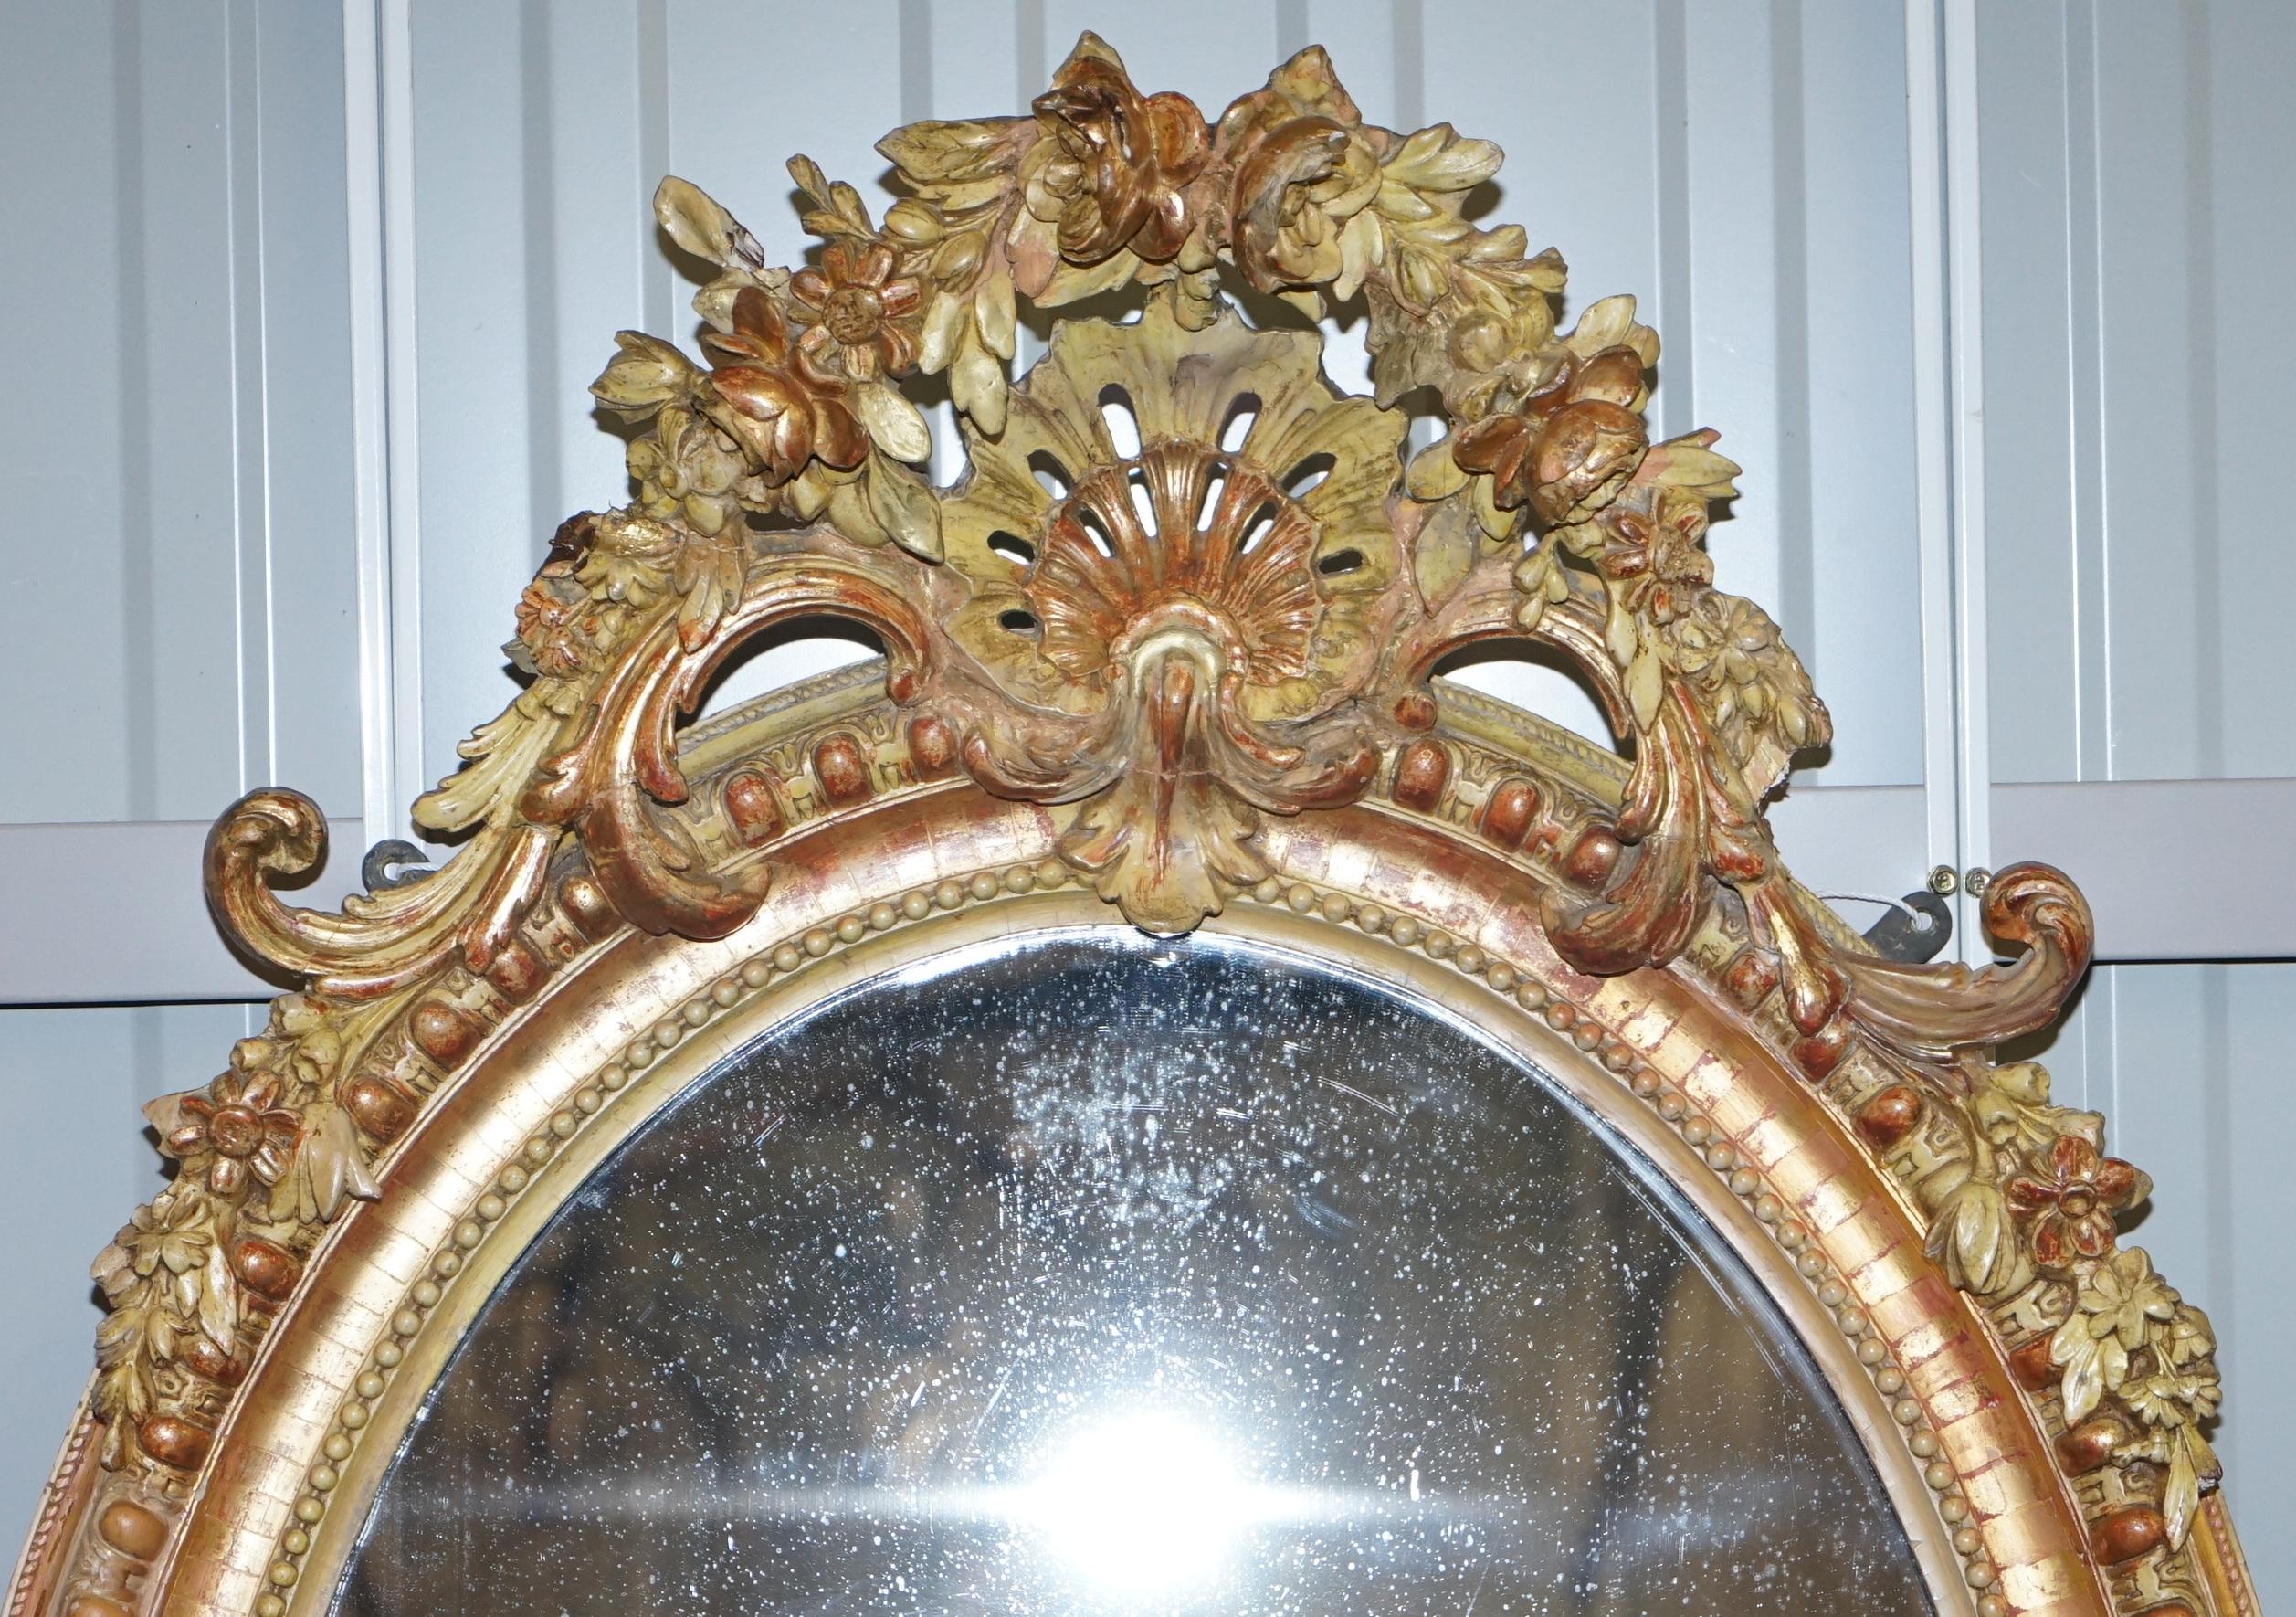 We are delighted to offer for sale this rare 19th century gold giltwood hand carved Gesso wall mirror

A very good looking well made and decorative 19th century French oval mirror, the floral and shell Gesso work is all carved from one solid piece